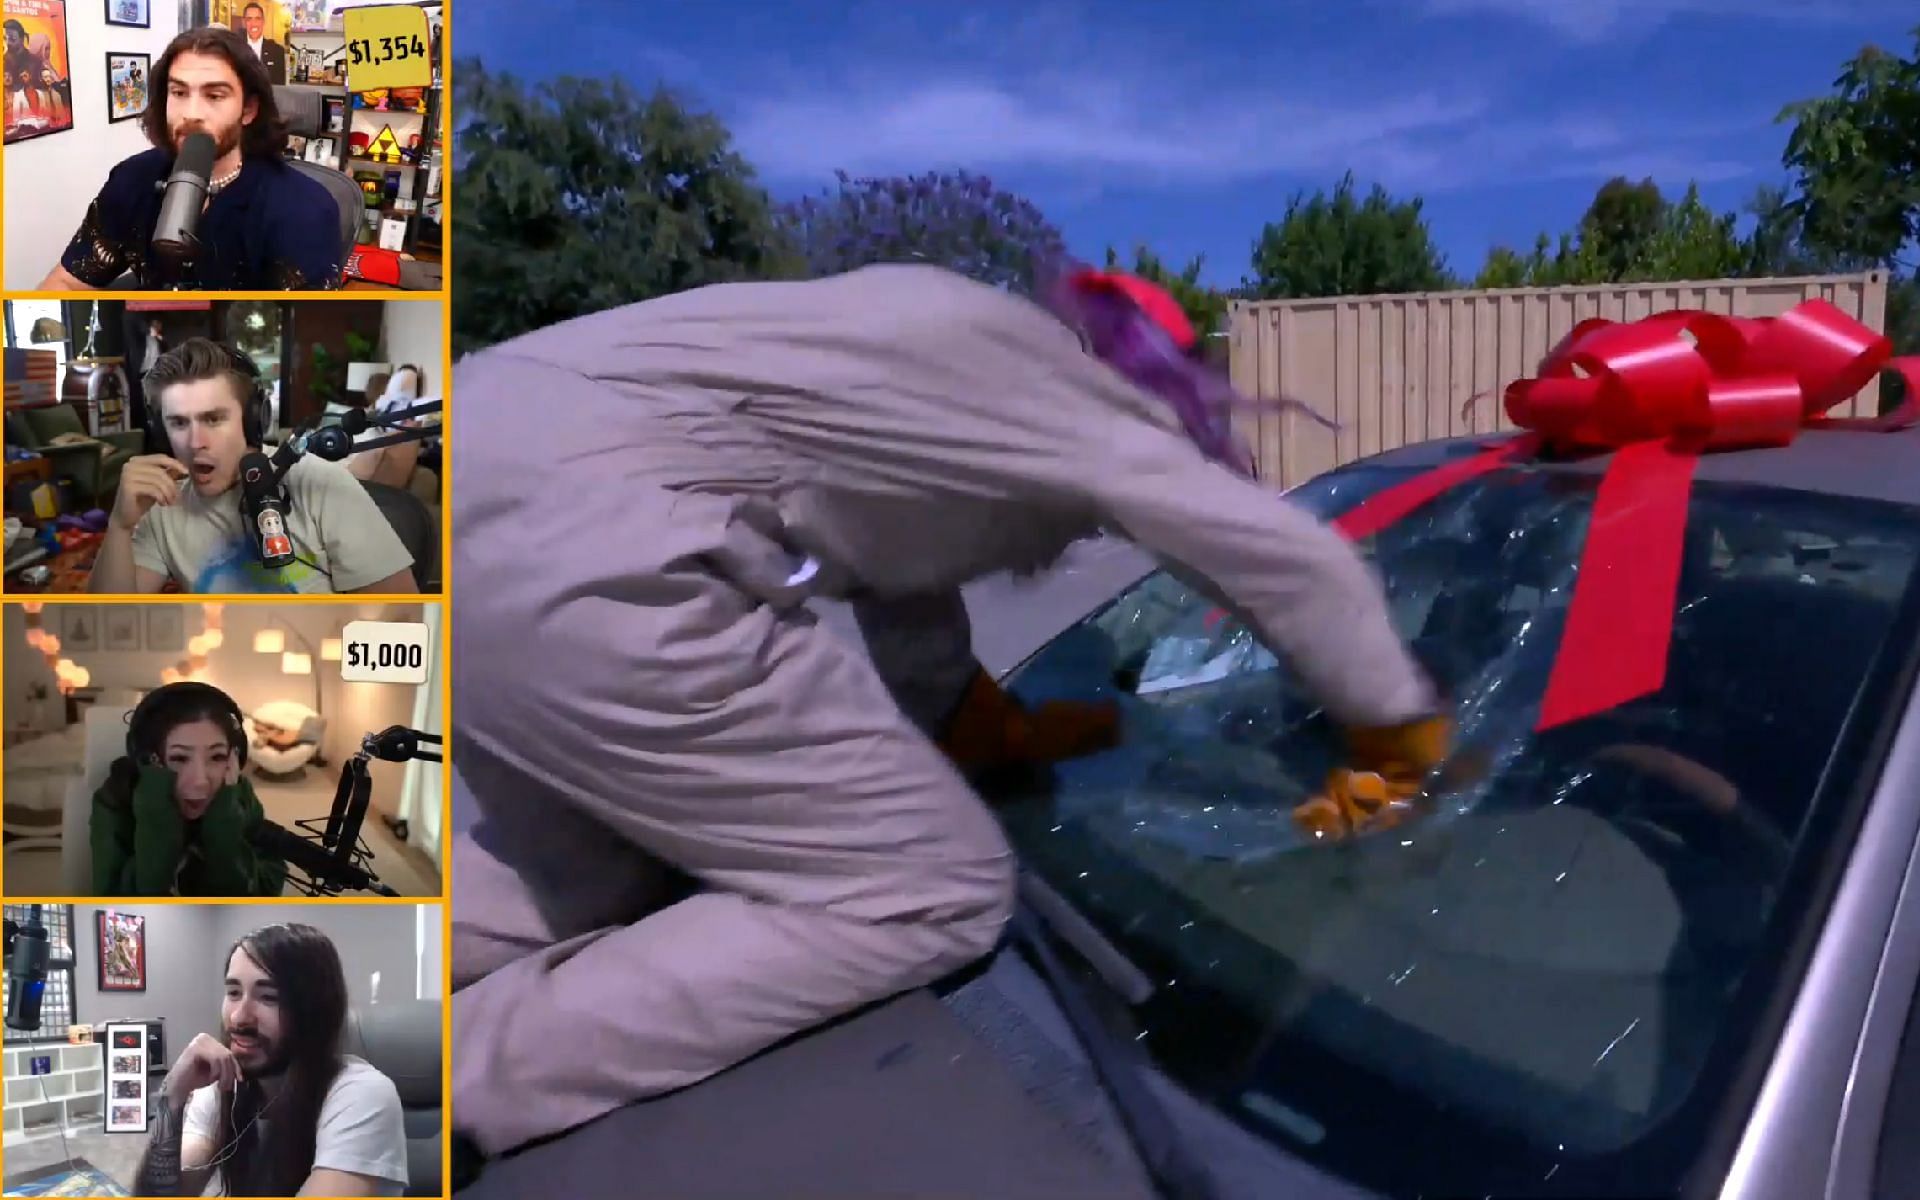 JustaMinx thrashes a car during the latest episode of Name of Your Price (Image via AustinShow/Twitch)